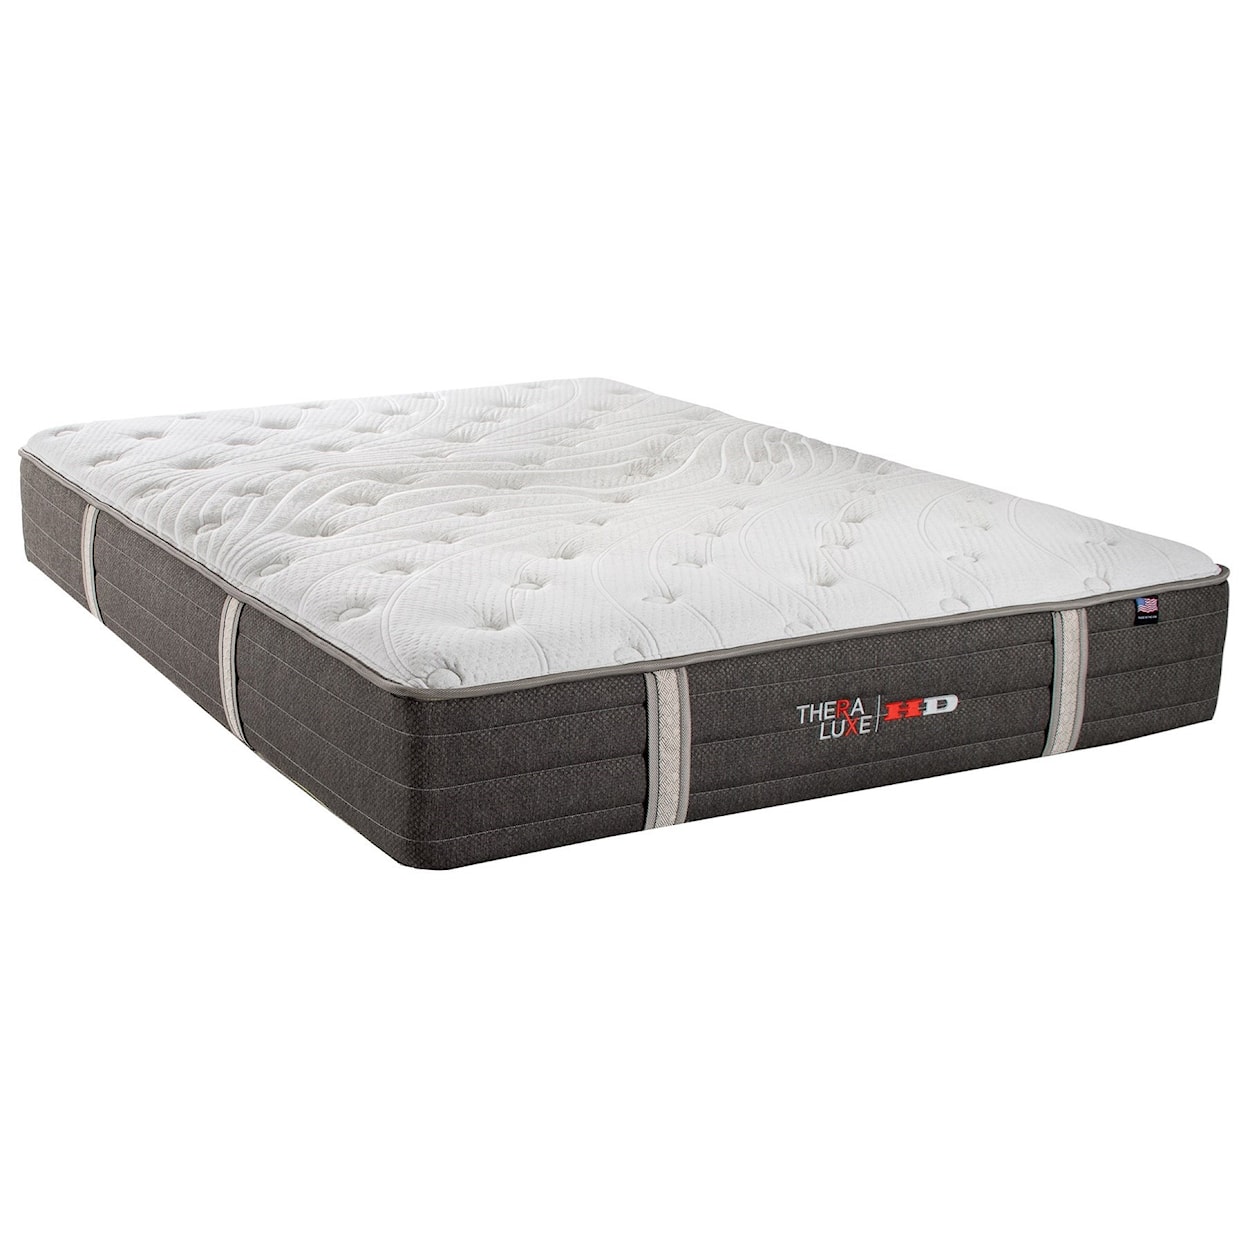 Therapedic Theraluxe Spruce Cal King Pocketed Coil Mattress